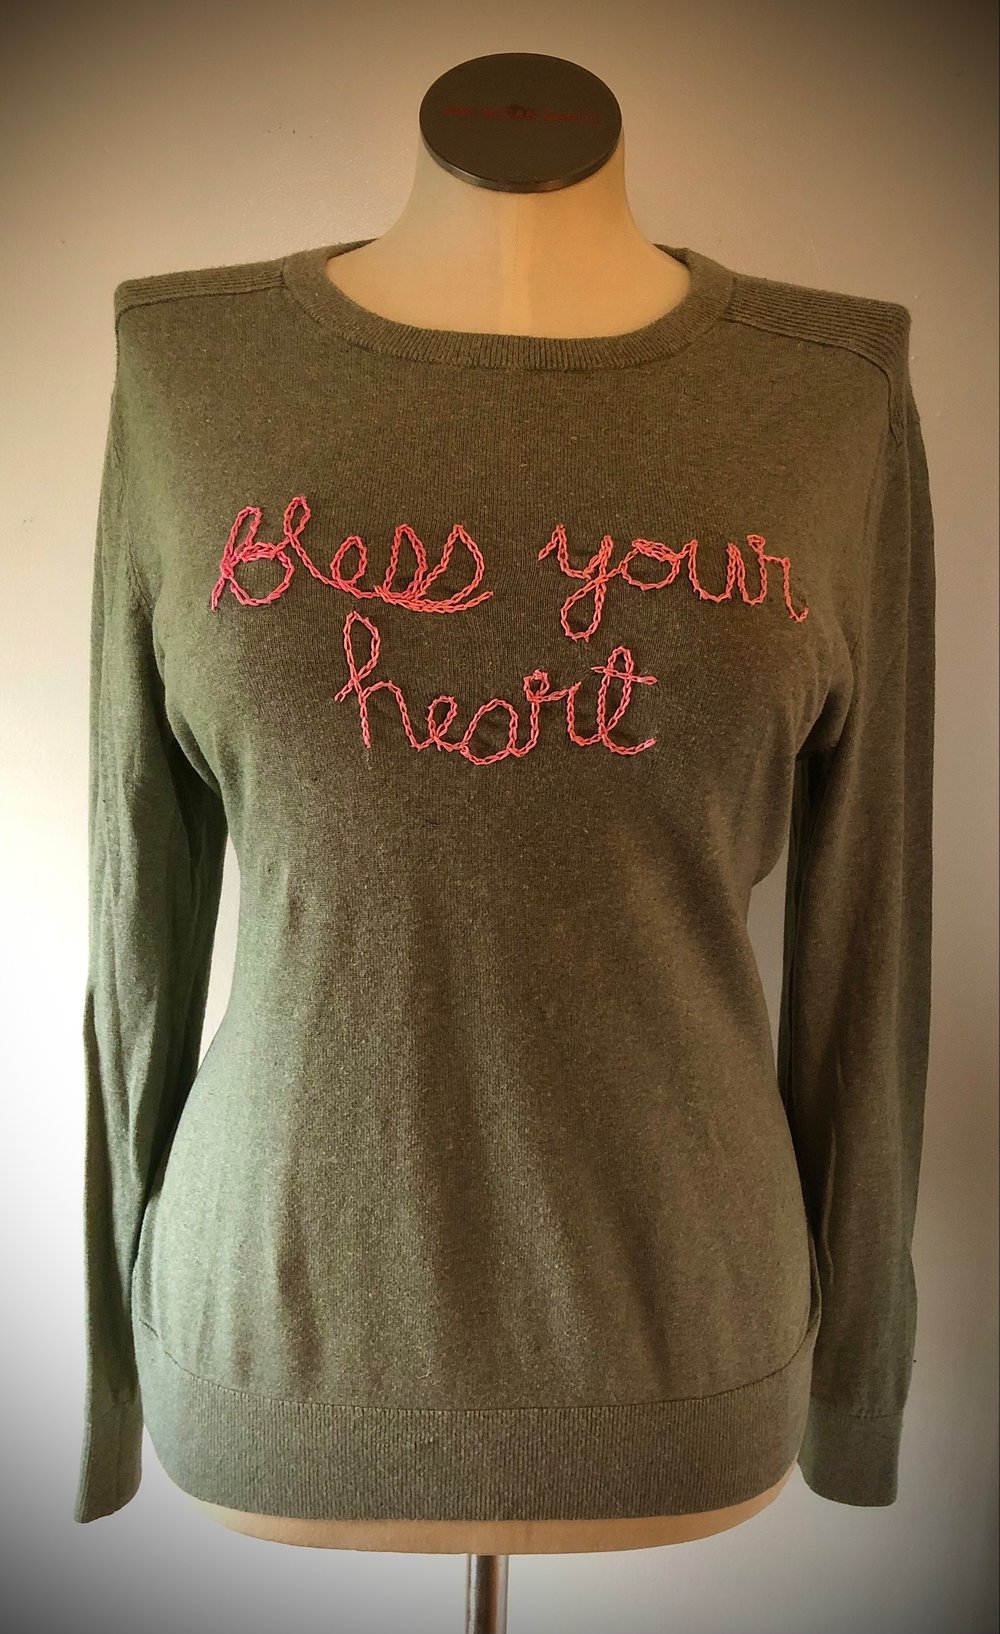 Gently pre-owned “Bless Your Heart” hand-embroidered sweater